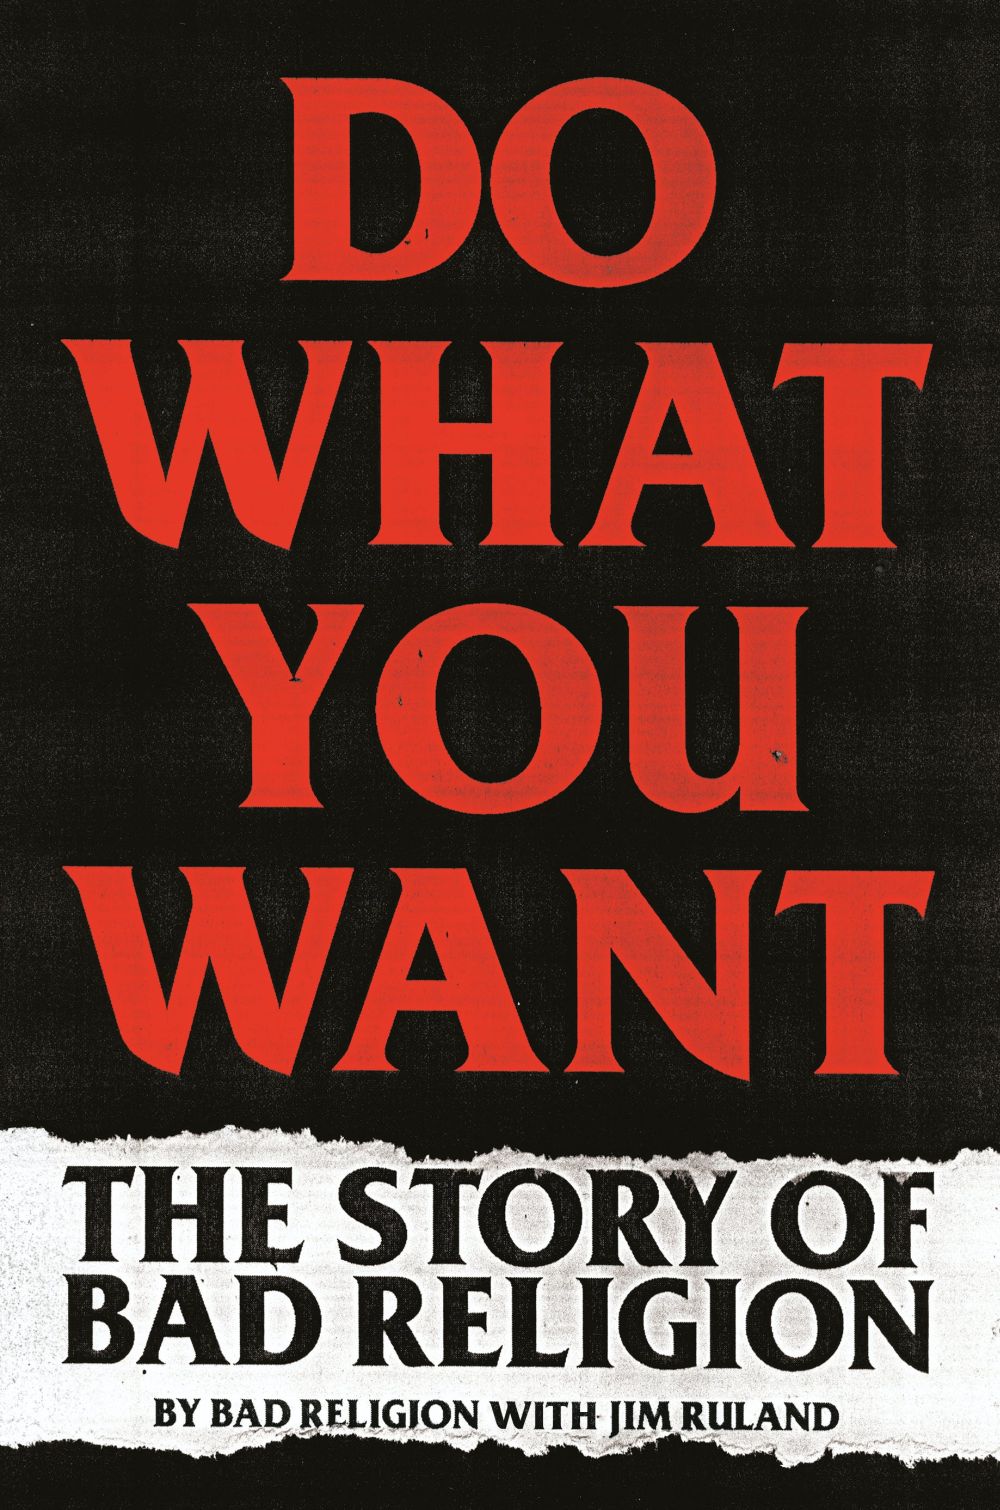 Bad Religion - Do What You Want: The Story Of Bad Religion (HC) - Book - New